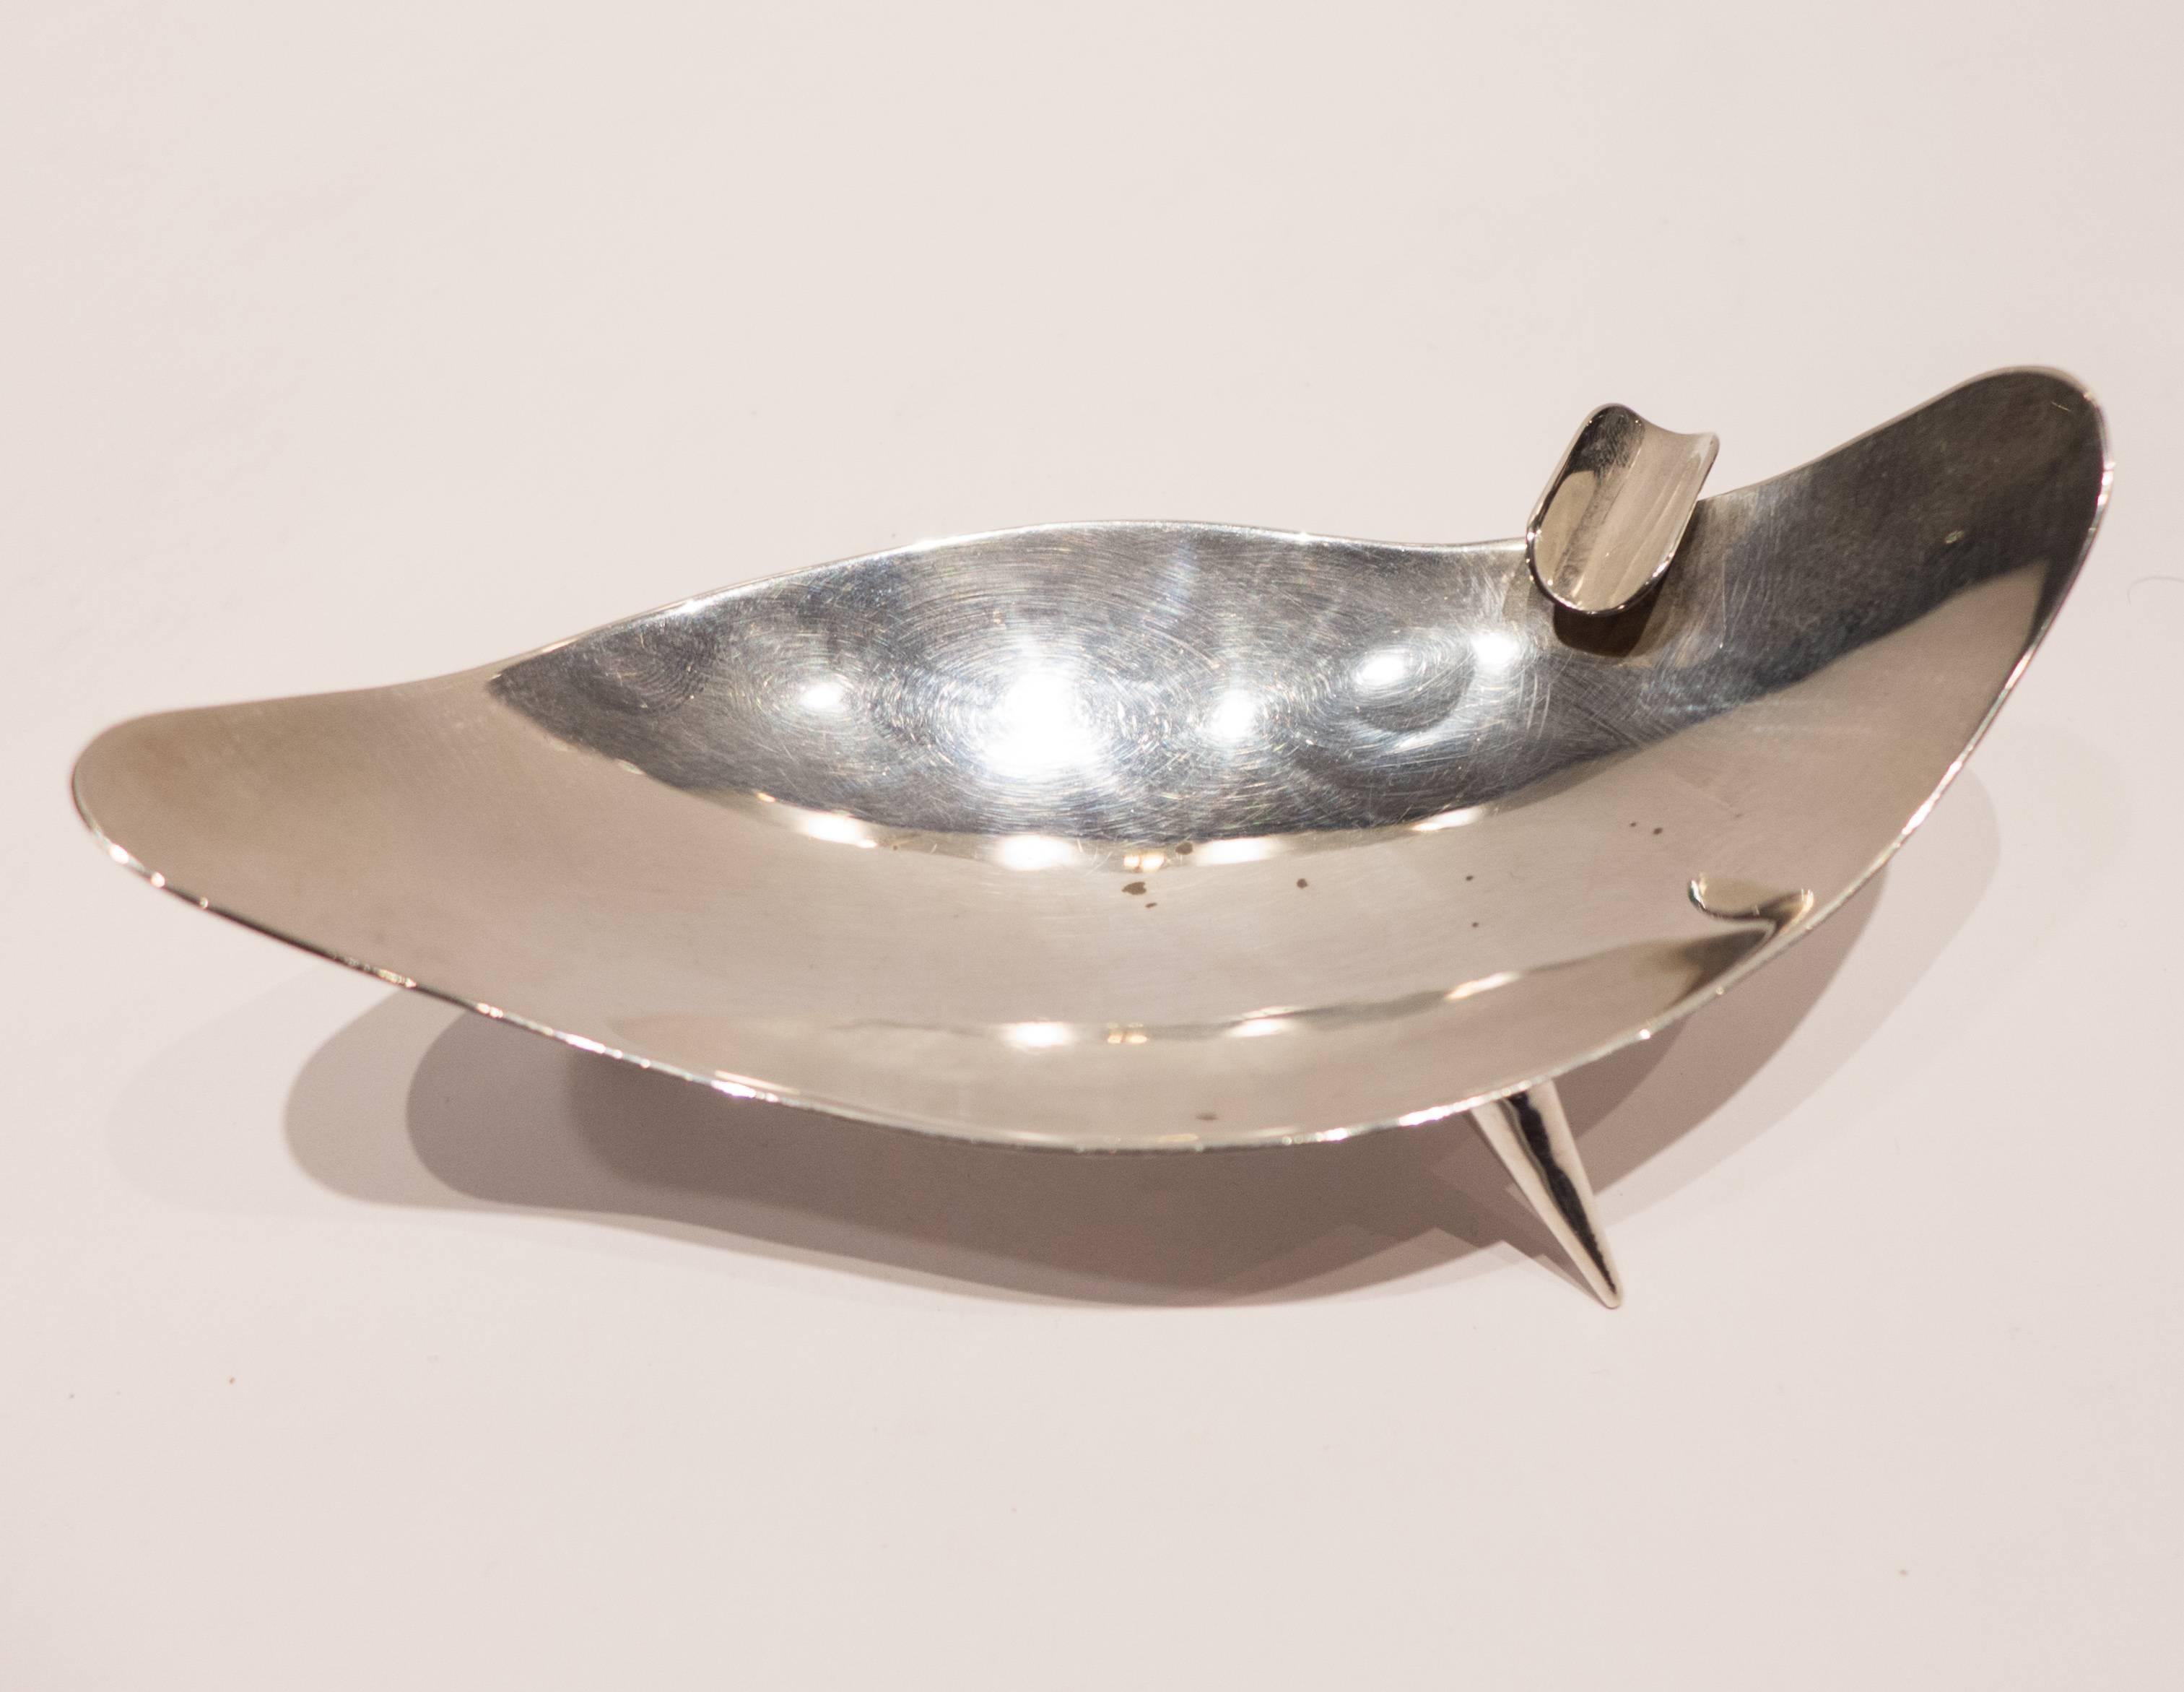 Handmade, free-form-shaped .925 sterling silver ashtray with swooping curves, atop three conical feet. By Mexican silversmith Juventino Lopez Reyers, circa 1960. A well-made, nicely sculpturally abstract composition by a noted Mexican artisan who